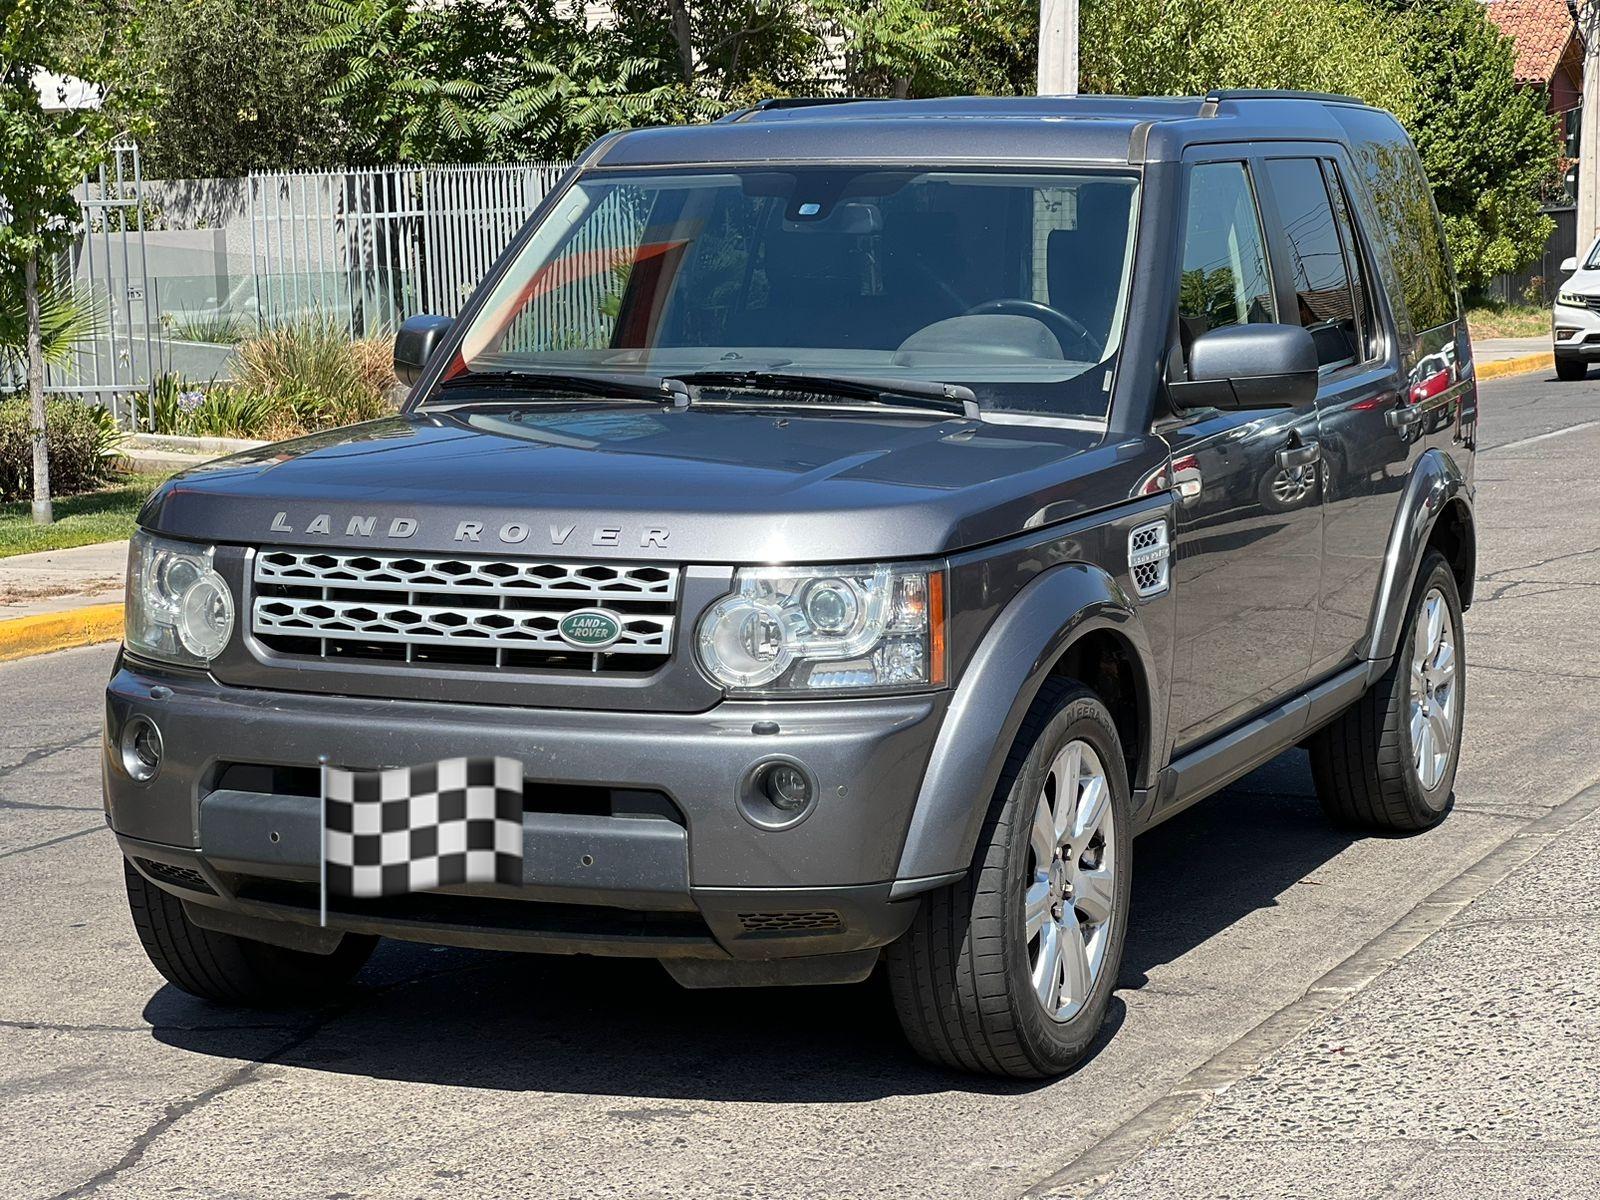 LAND ROVER DISCOVERY DISCOVERY 4 3.0CC SE DIESEL 2014 DISCOVERY 4 3.0 SE DIESEL 2 CORRIDAS DE ASIENTOS - AUTOTECH